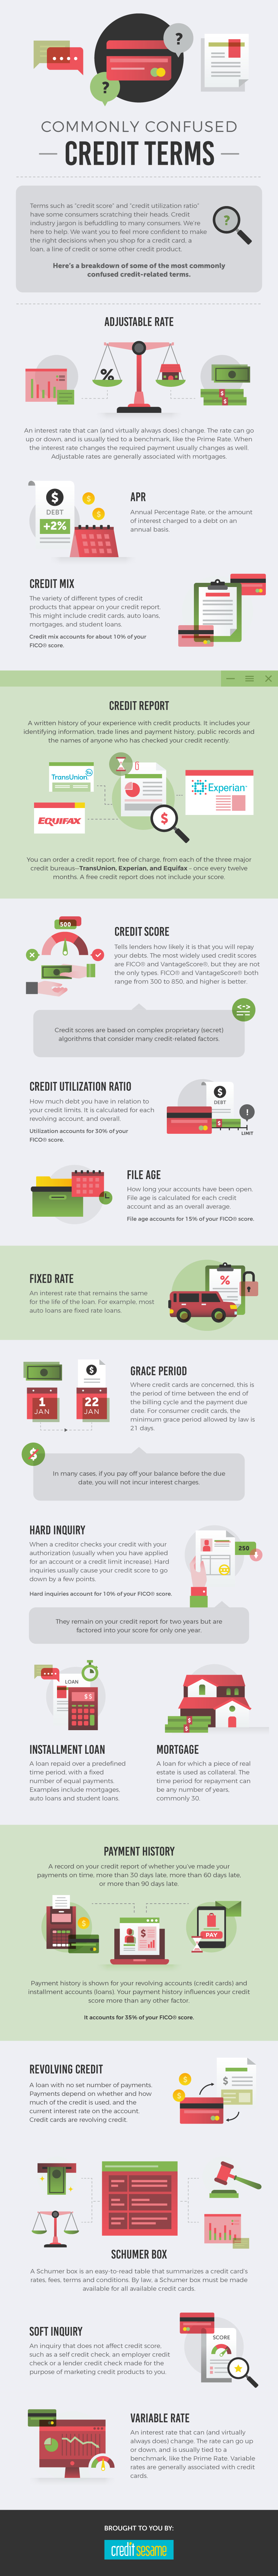 Infographic for Commonly Confused Credit Terms